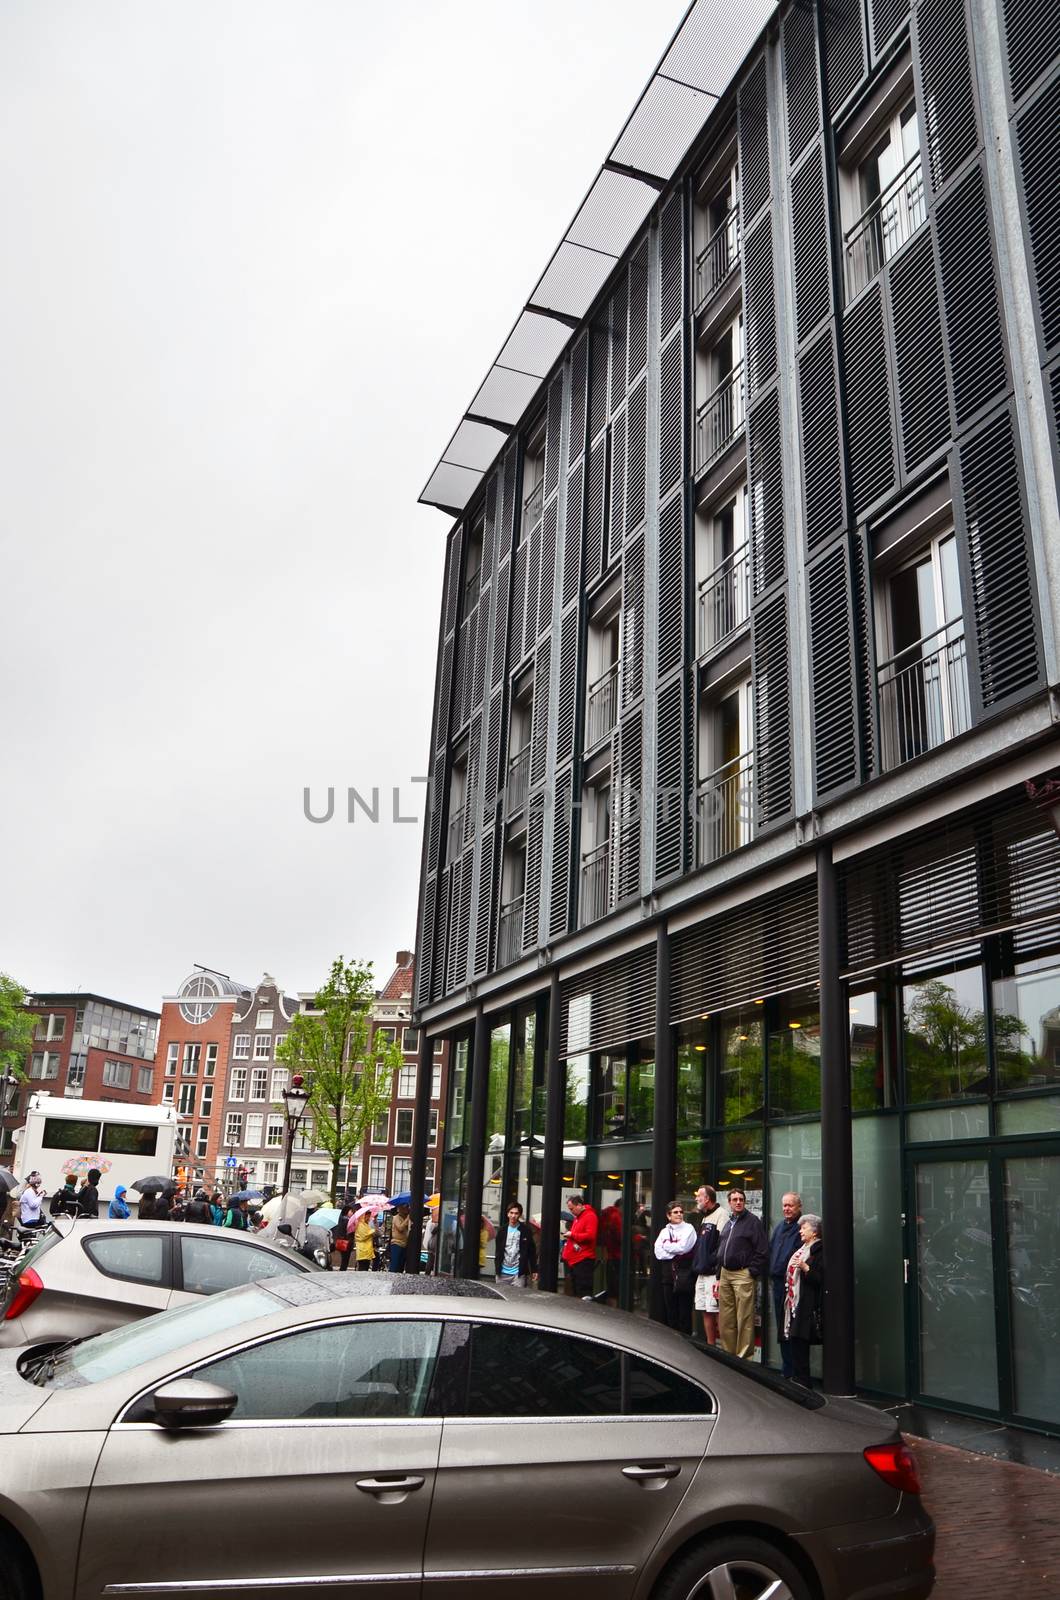 Amsterdam, Netherlands - May 16, 2015: Tourists stand in a queue to Anne Frank House Museum on May 16, 2015. The Anne Frank House Museum is one of Amsterdam's most popular museums opened in 1960.